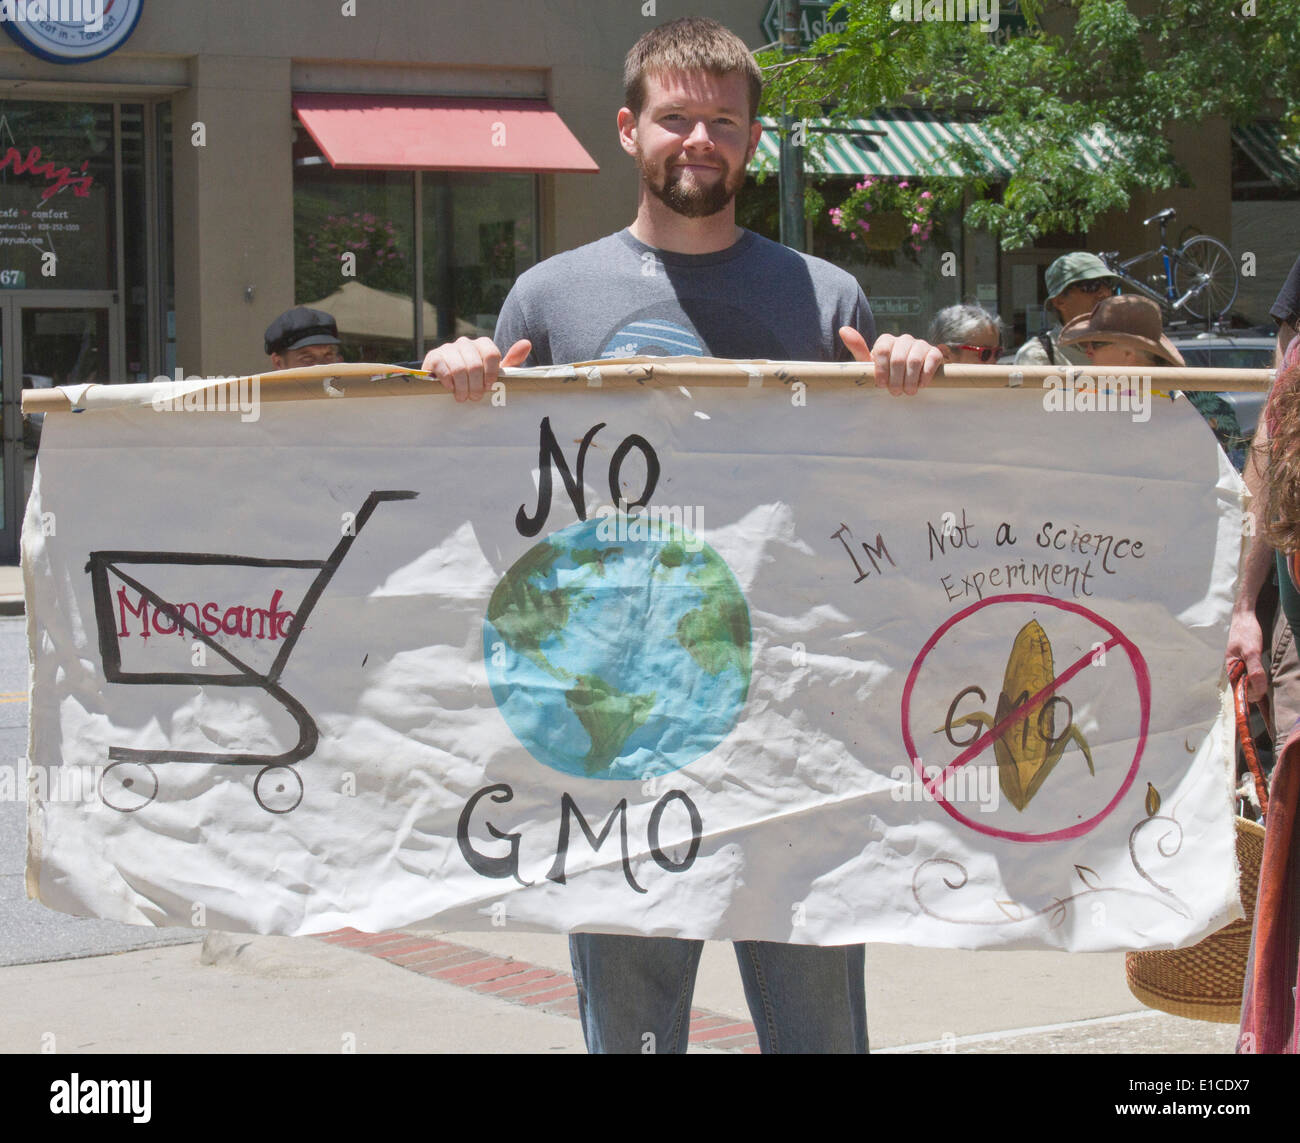 Asheville, NC, USA - May 24, 2014: Young man holds a sign protesting GMO food and Monanto Stock Photo